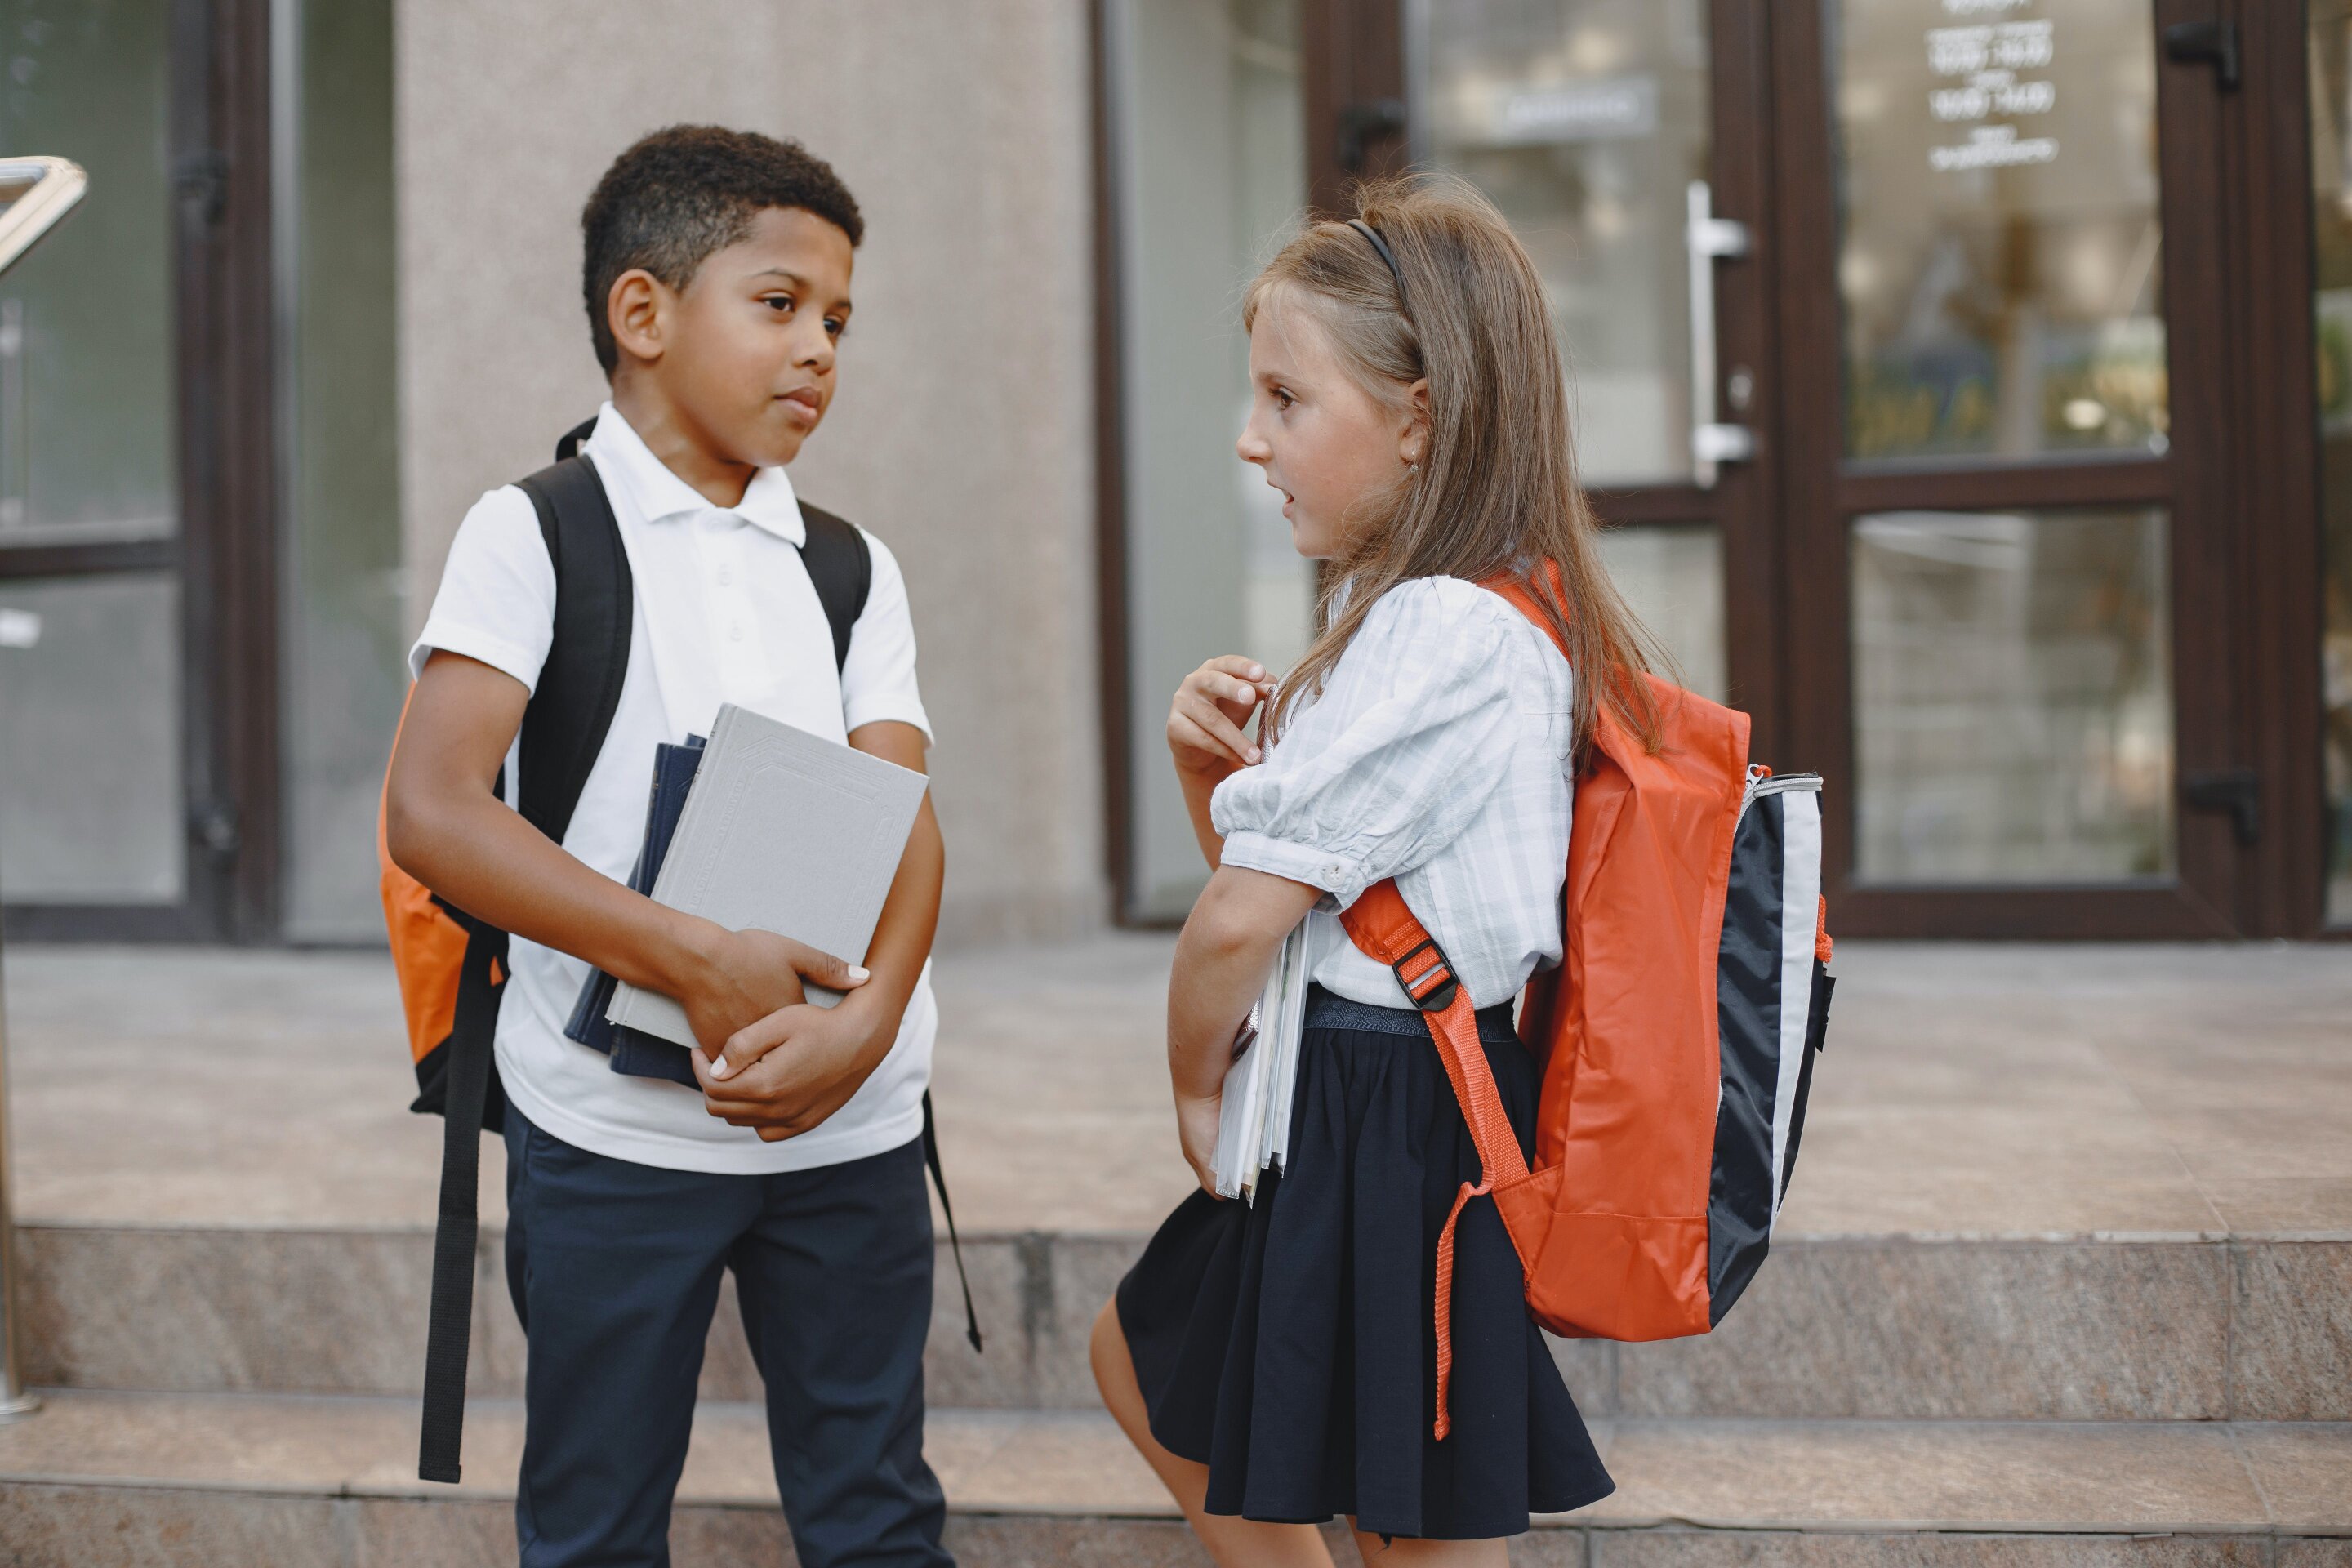 #School uniform policies linked to students getting less exercise